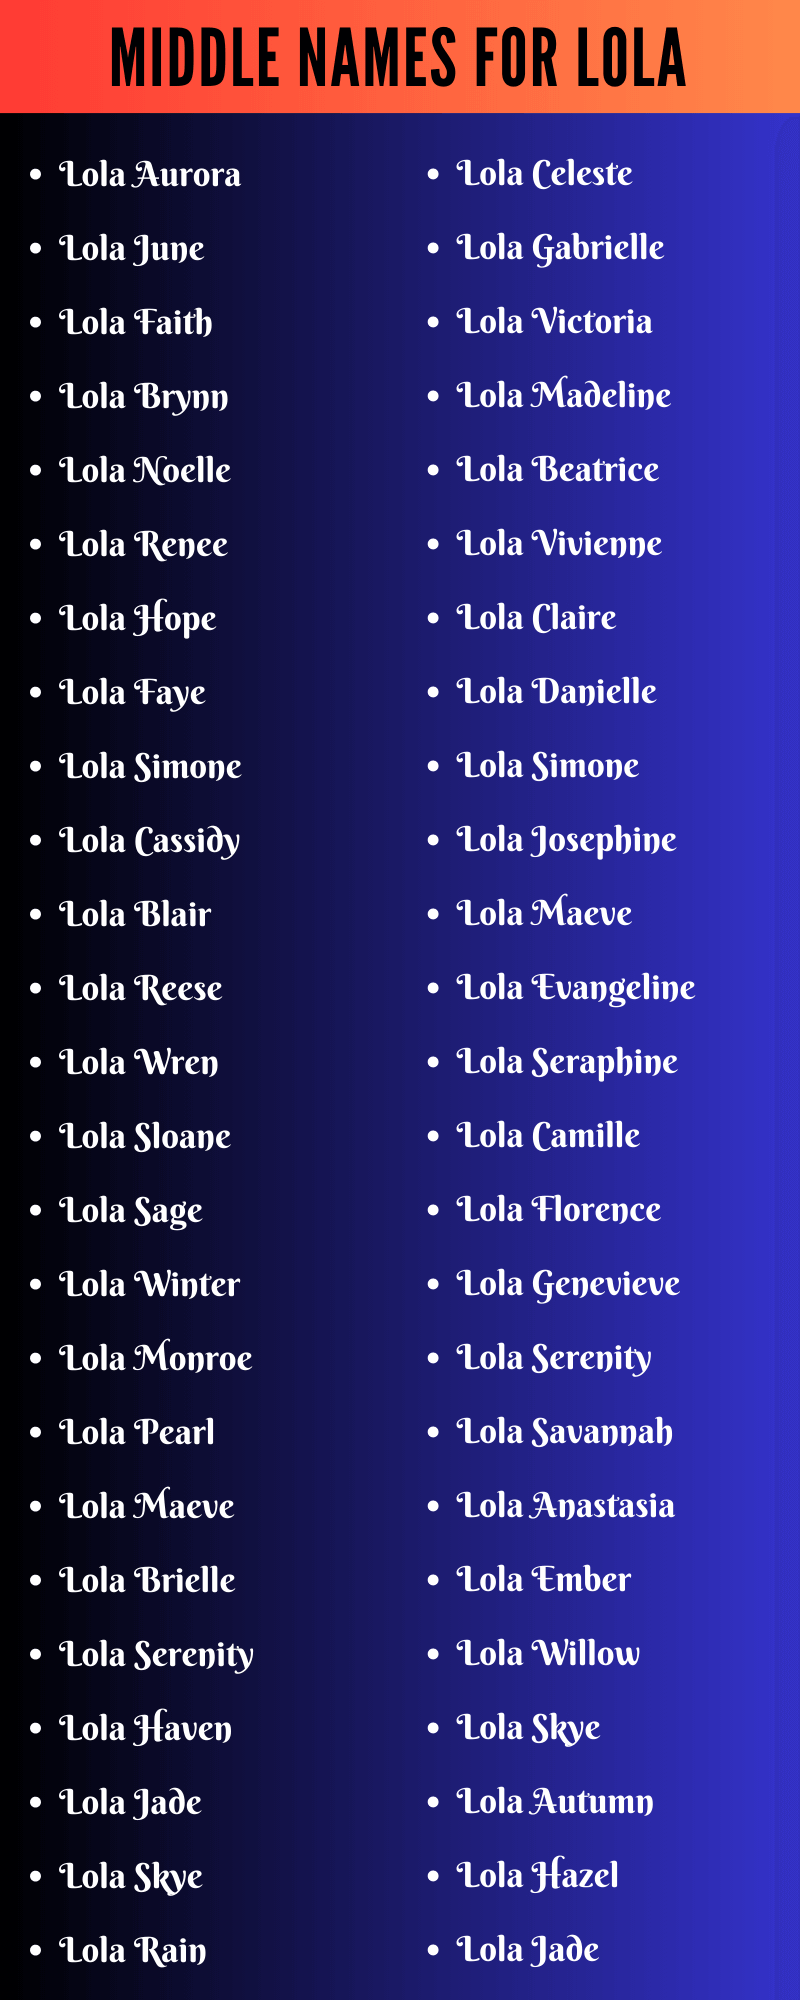 Middle Names For Lola